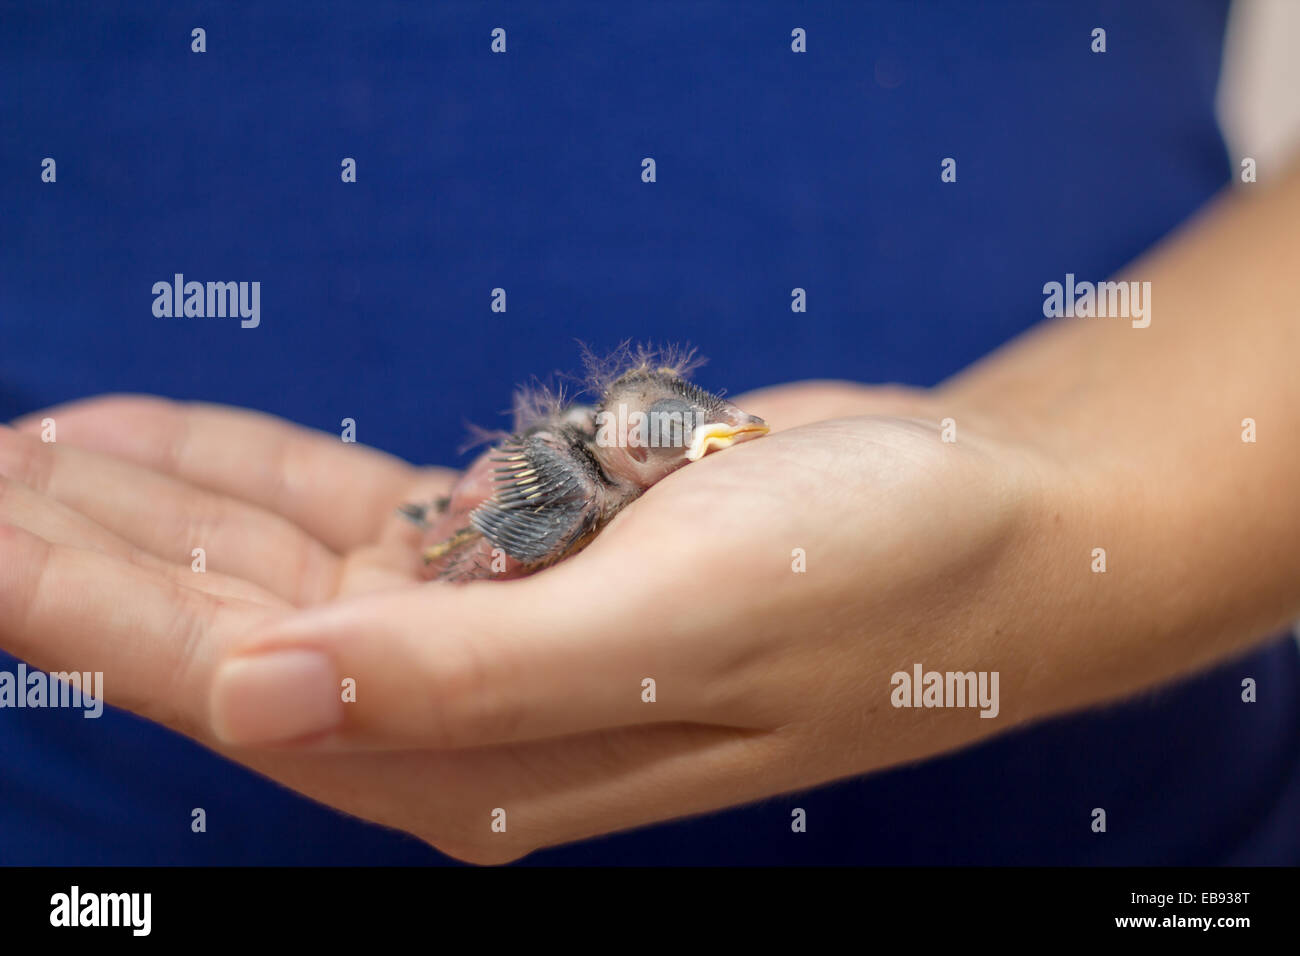 Woman with blue shirt holding a baby sparrow on her hand Stock Photo